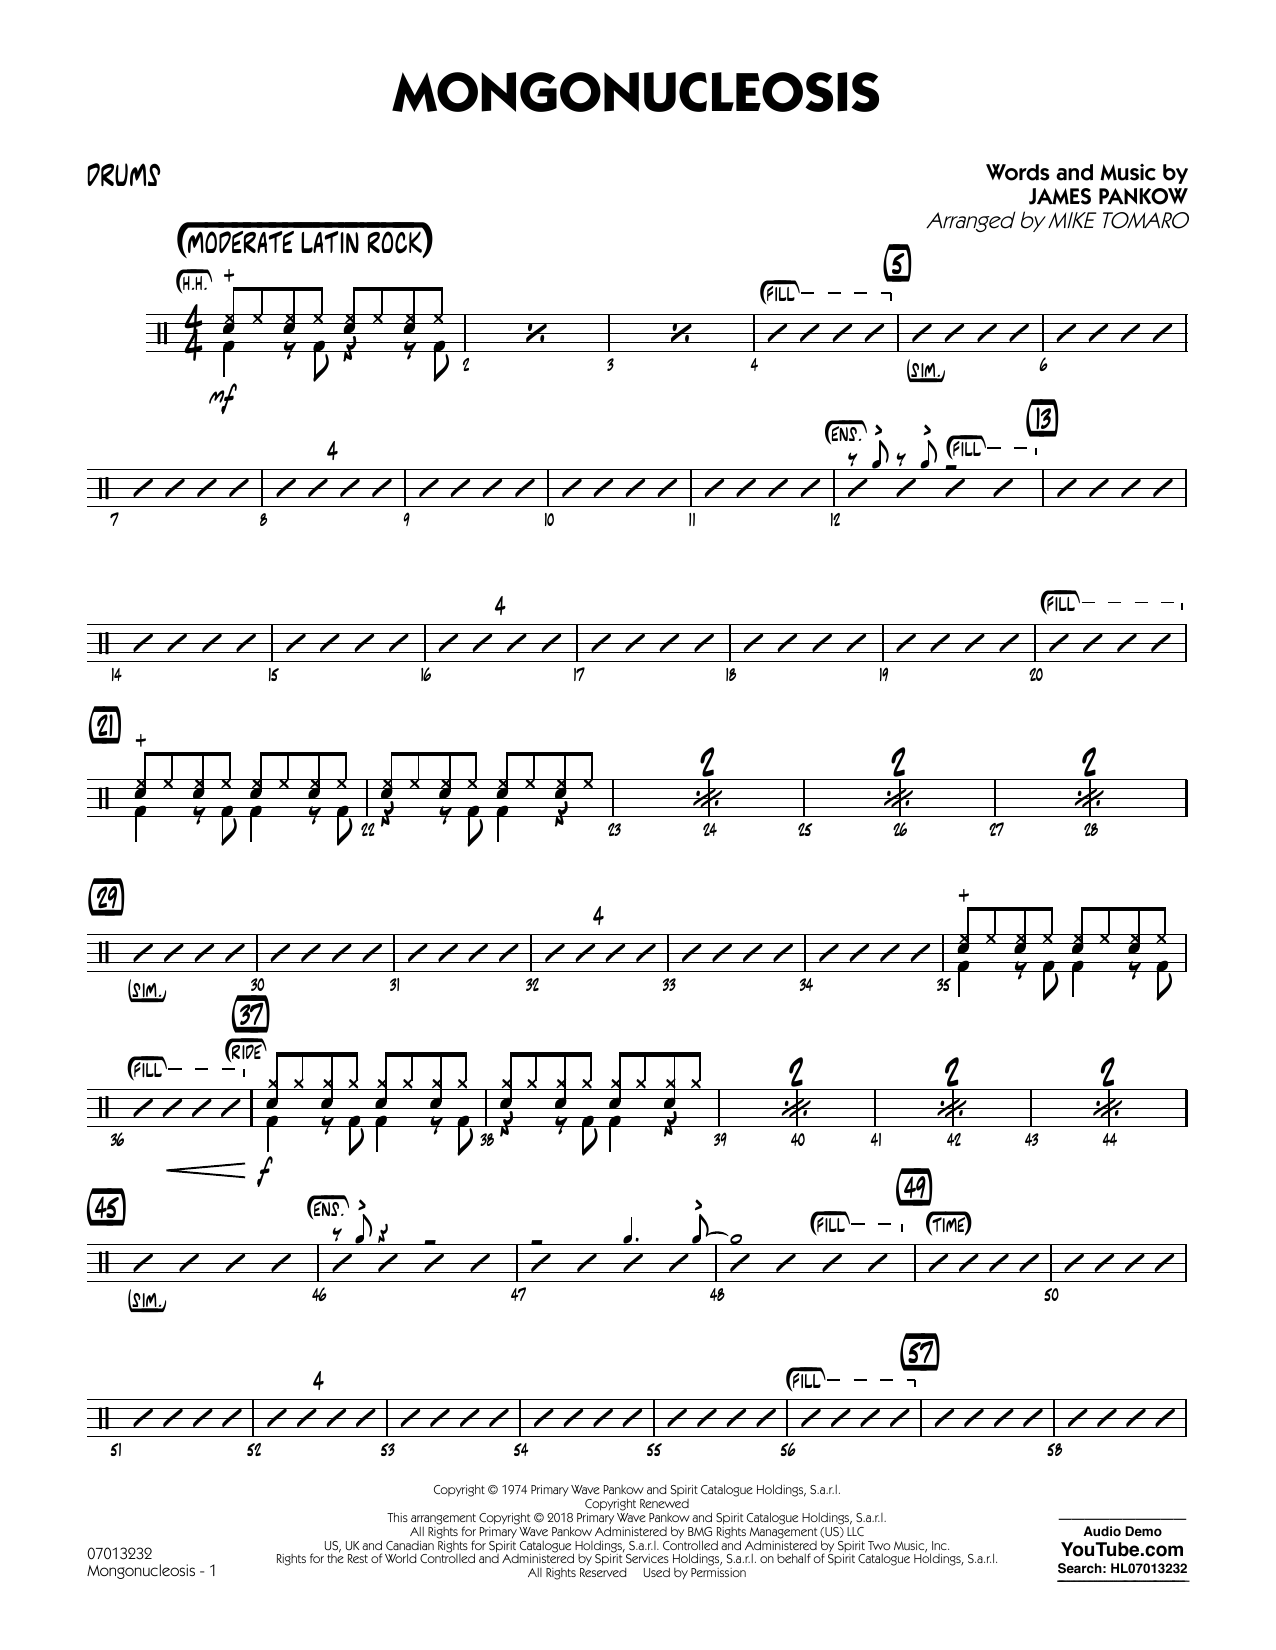 Chicago Mongonucleosis (arr. Mike Tomaro) - Drums sheet music preview music notes and score for Jazz Ensemble including 2 page(s)